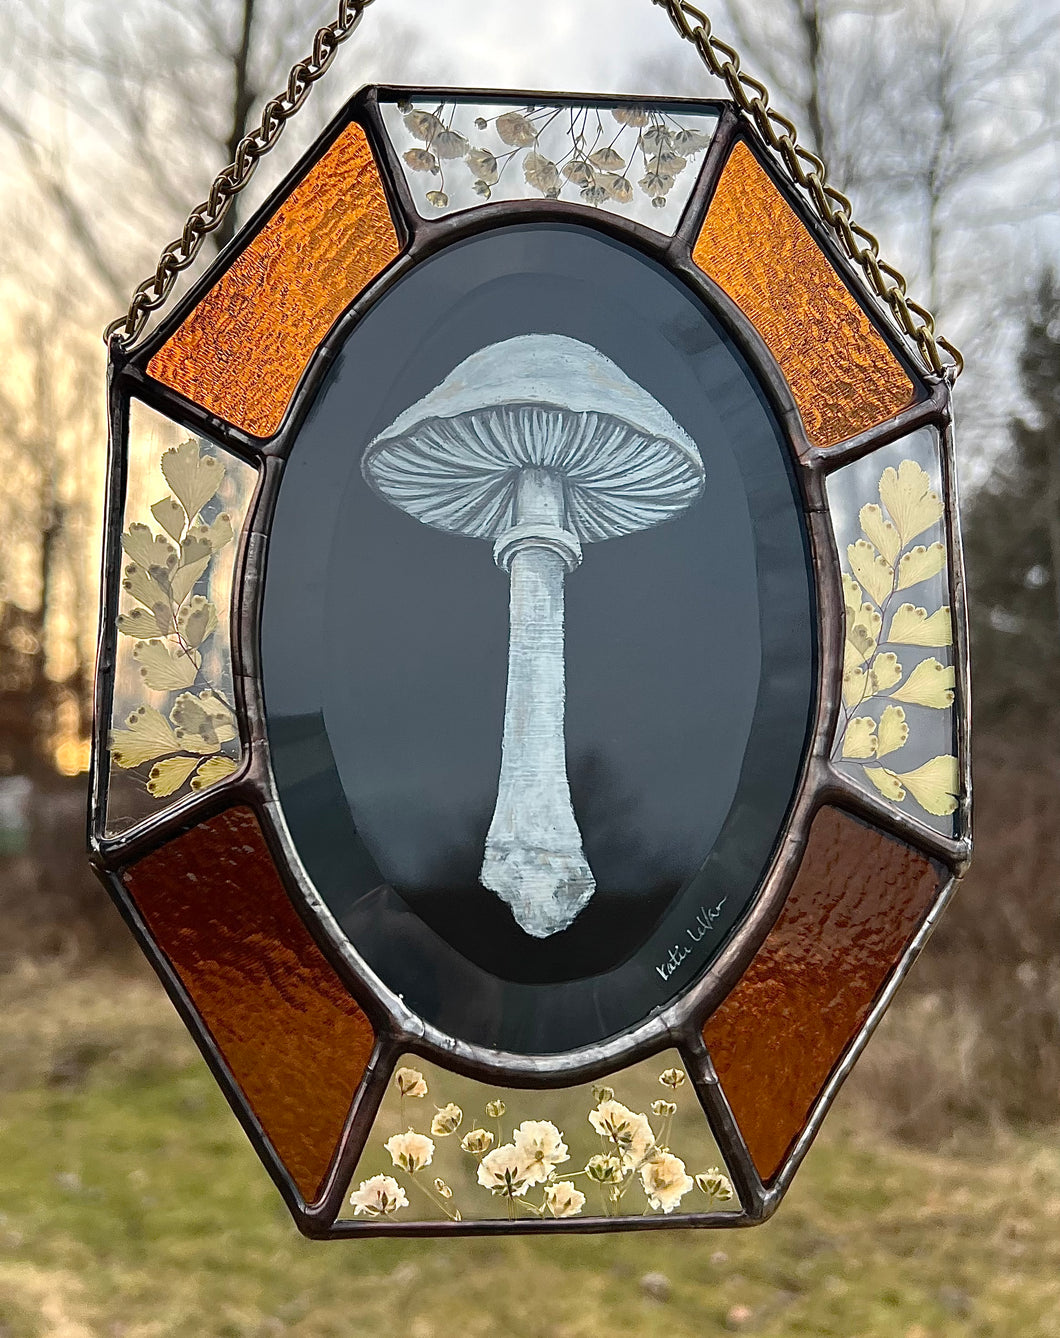 Painted white porcelain fungus on black background  in center with alternating amber glass and clear glass with floral inclusion border. Gouache on paper with pressed gypsophila and maidenhair fern set between glass, with amber glass.